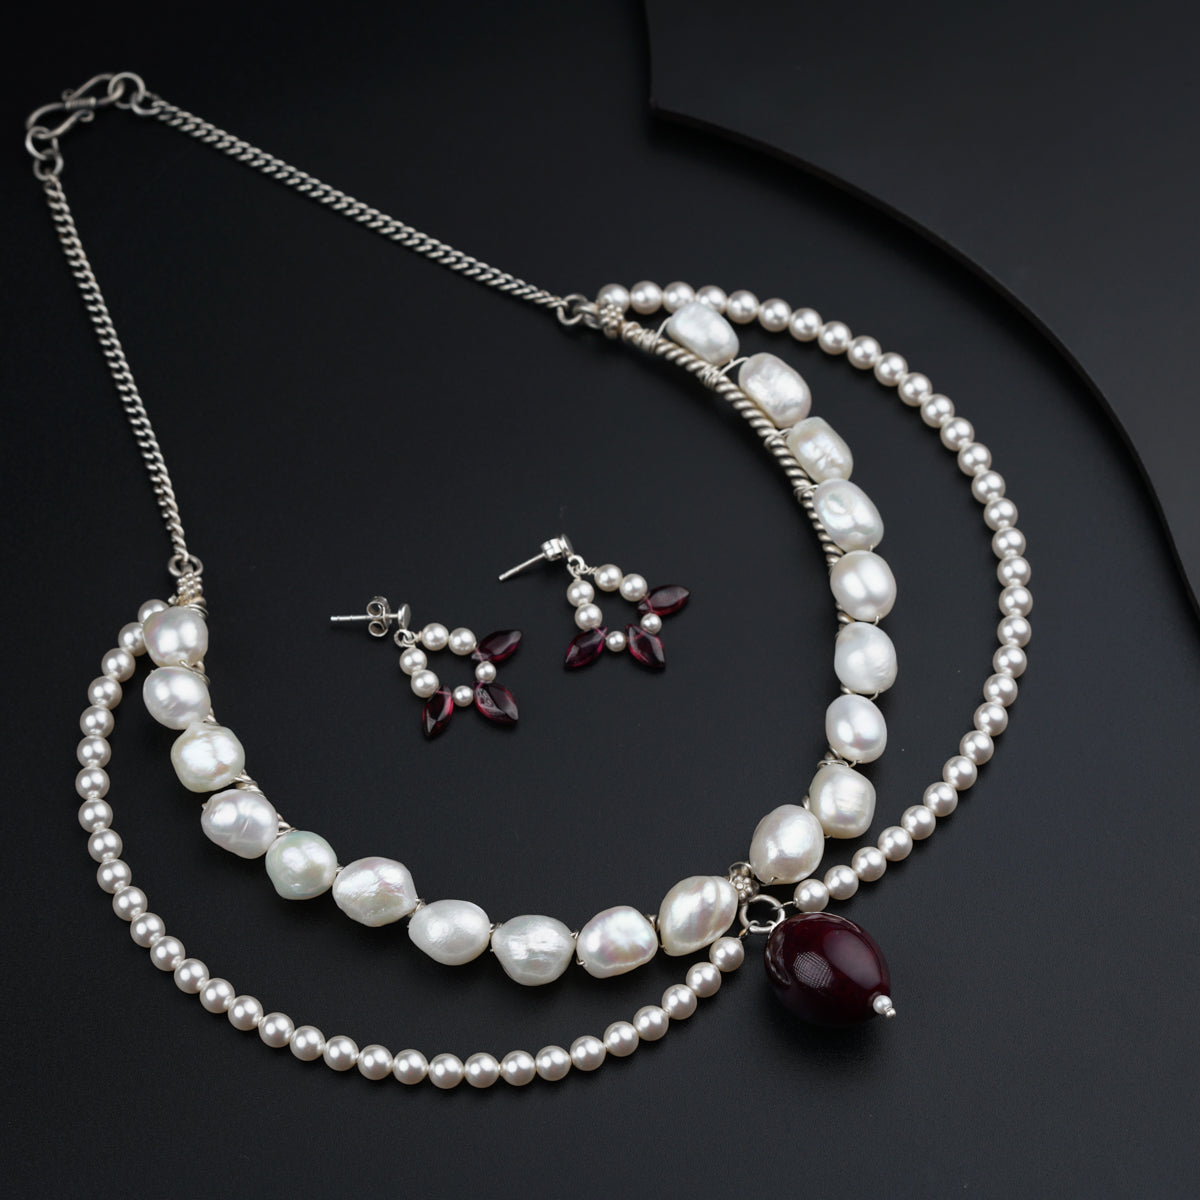 Collar Necklace and Earrings set with High Quality Pearls and Garnet Pendant